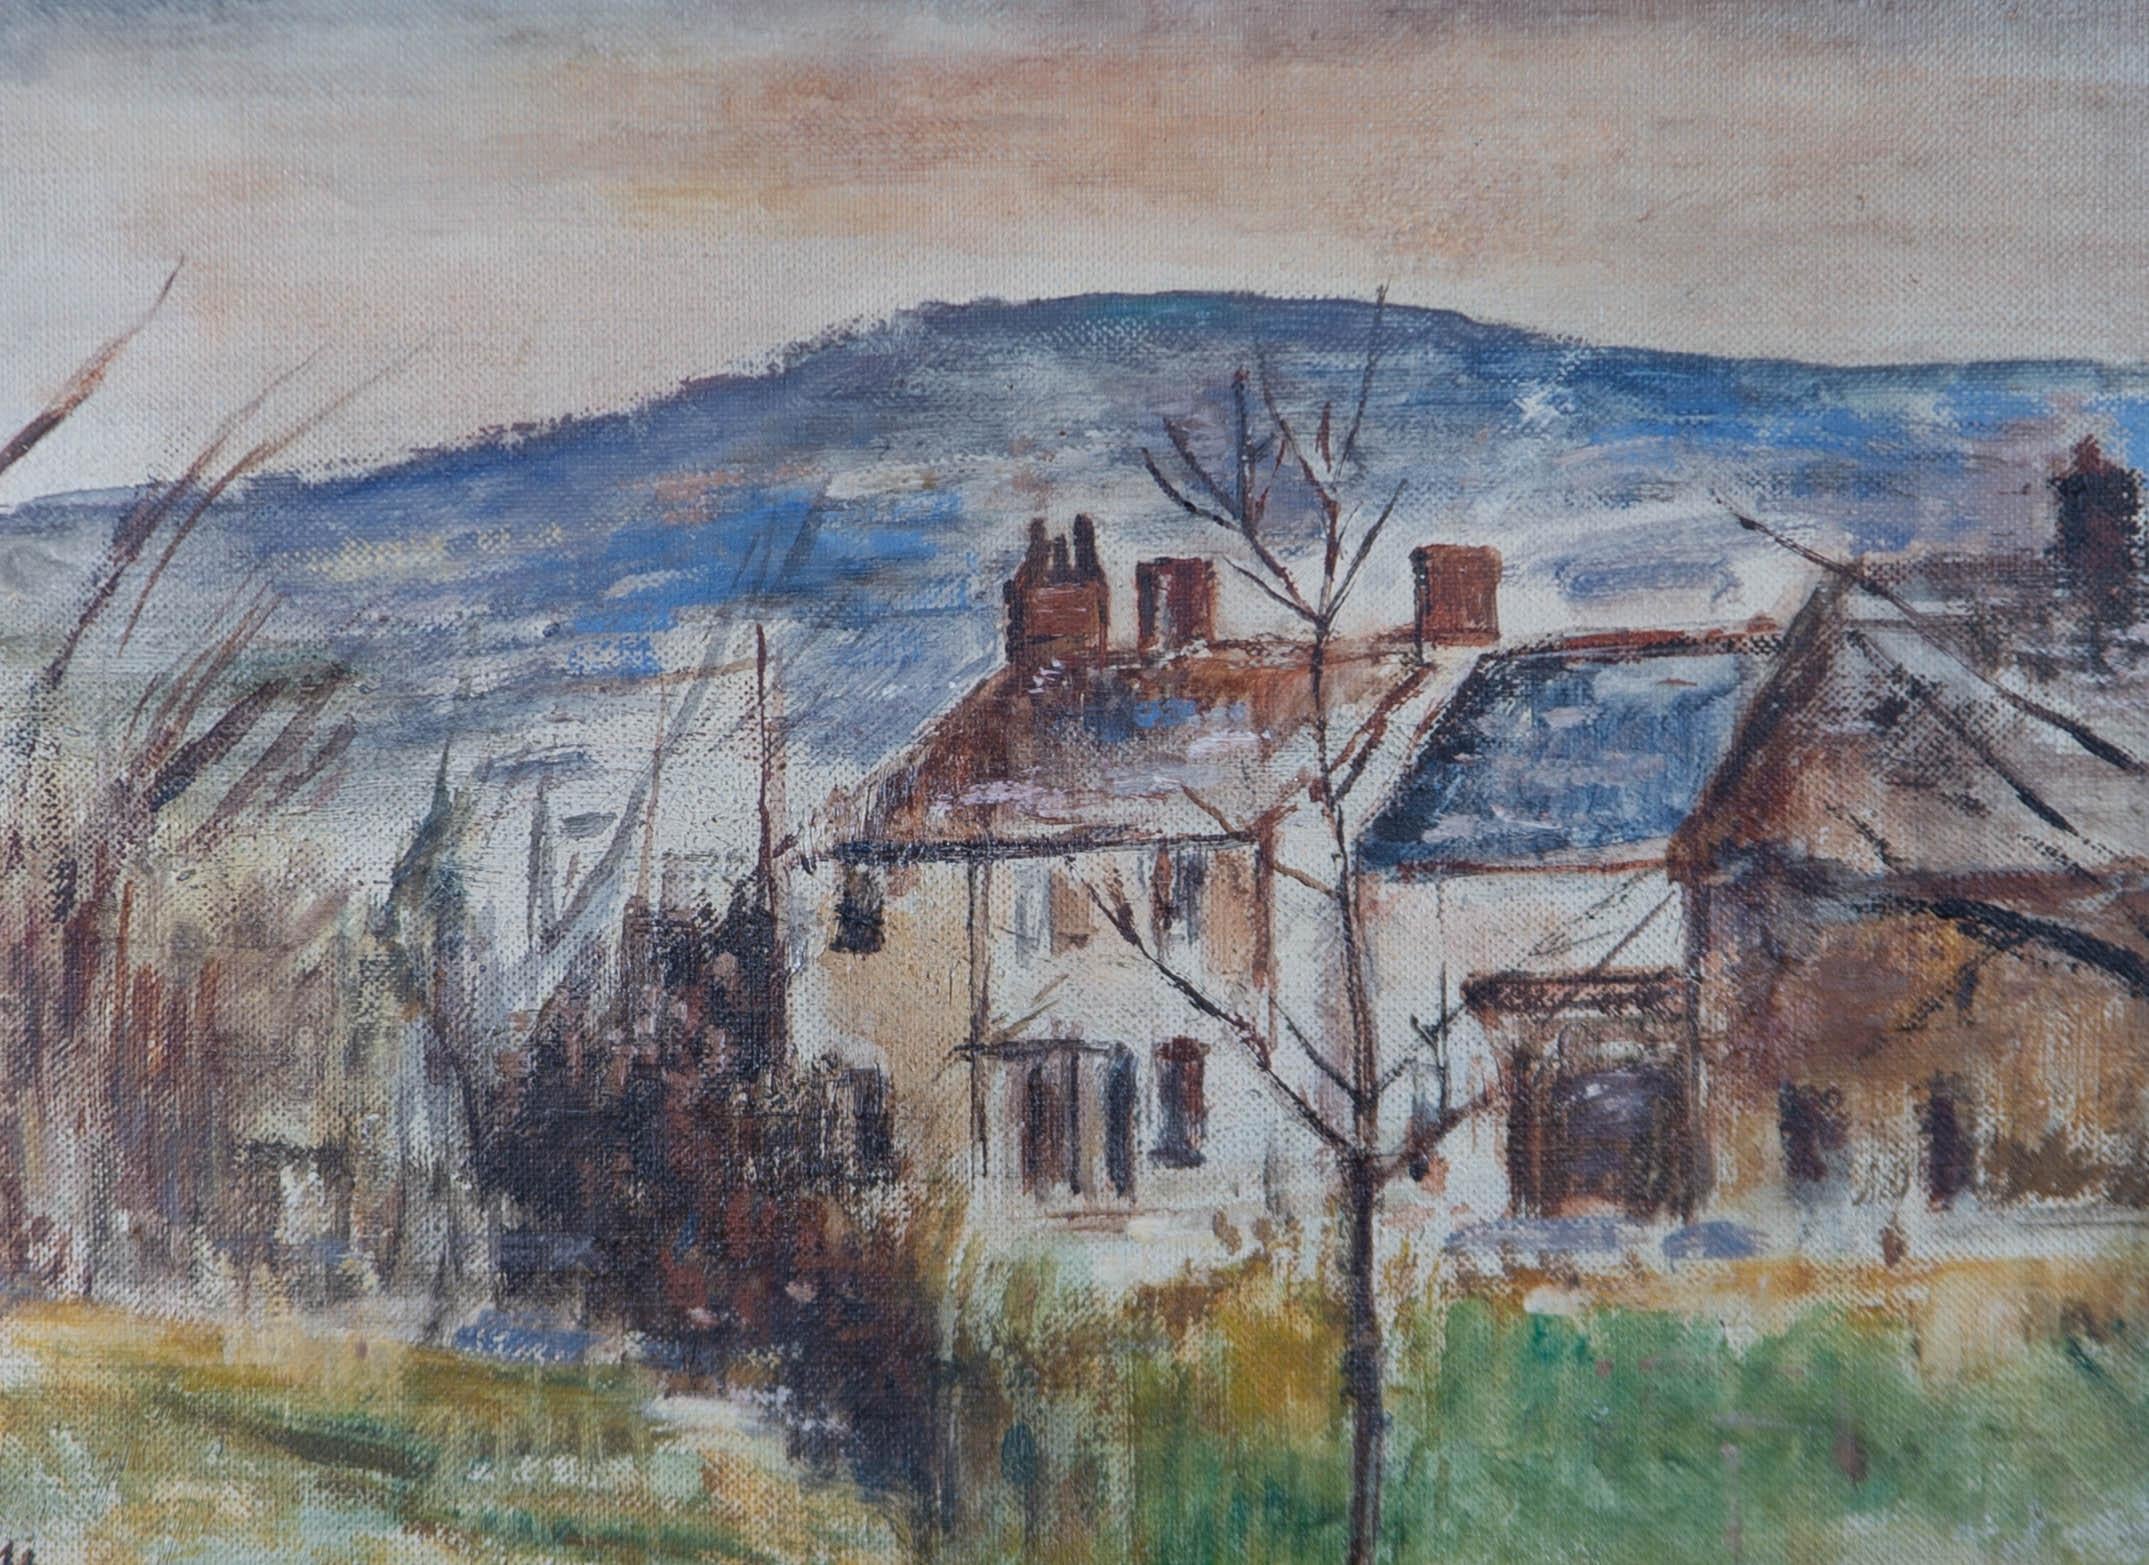 A charming mid 20th century oil painting, depicting a landscape scene with a row of houses in the background. Monogrammed to the lower left-hand corner. The artist's name is inscribed on the reverse. Presented in a distressed painted frame with